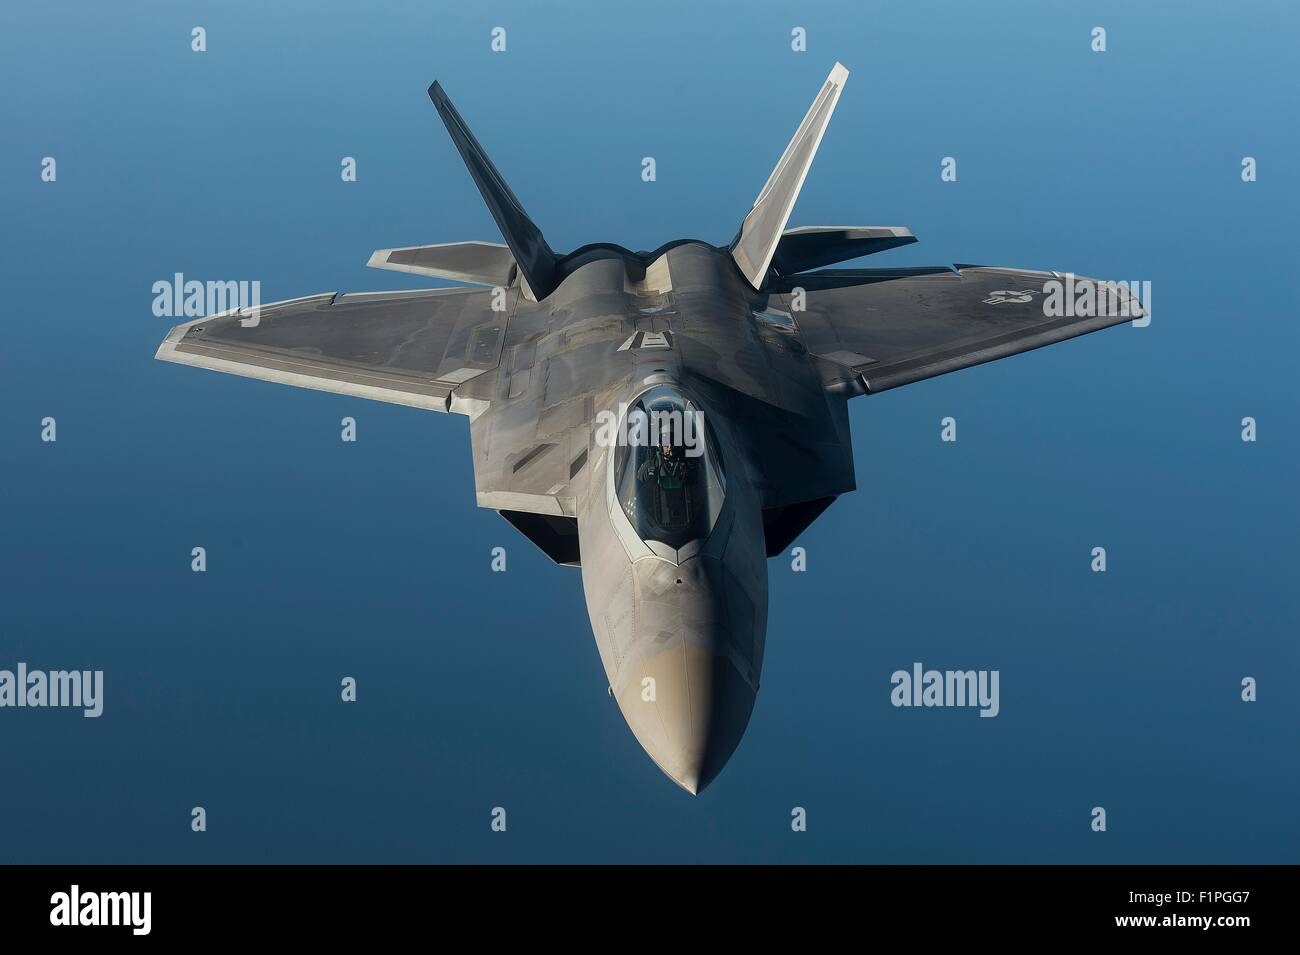 A U.S. Air Force F-22 Raptor stealth fighter aircraft flies in formation over the Baltic Sea during a forward deployment in support of NATO partners in Europe September 4, 2015 near Tallinn, Estonia. Stock Photo